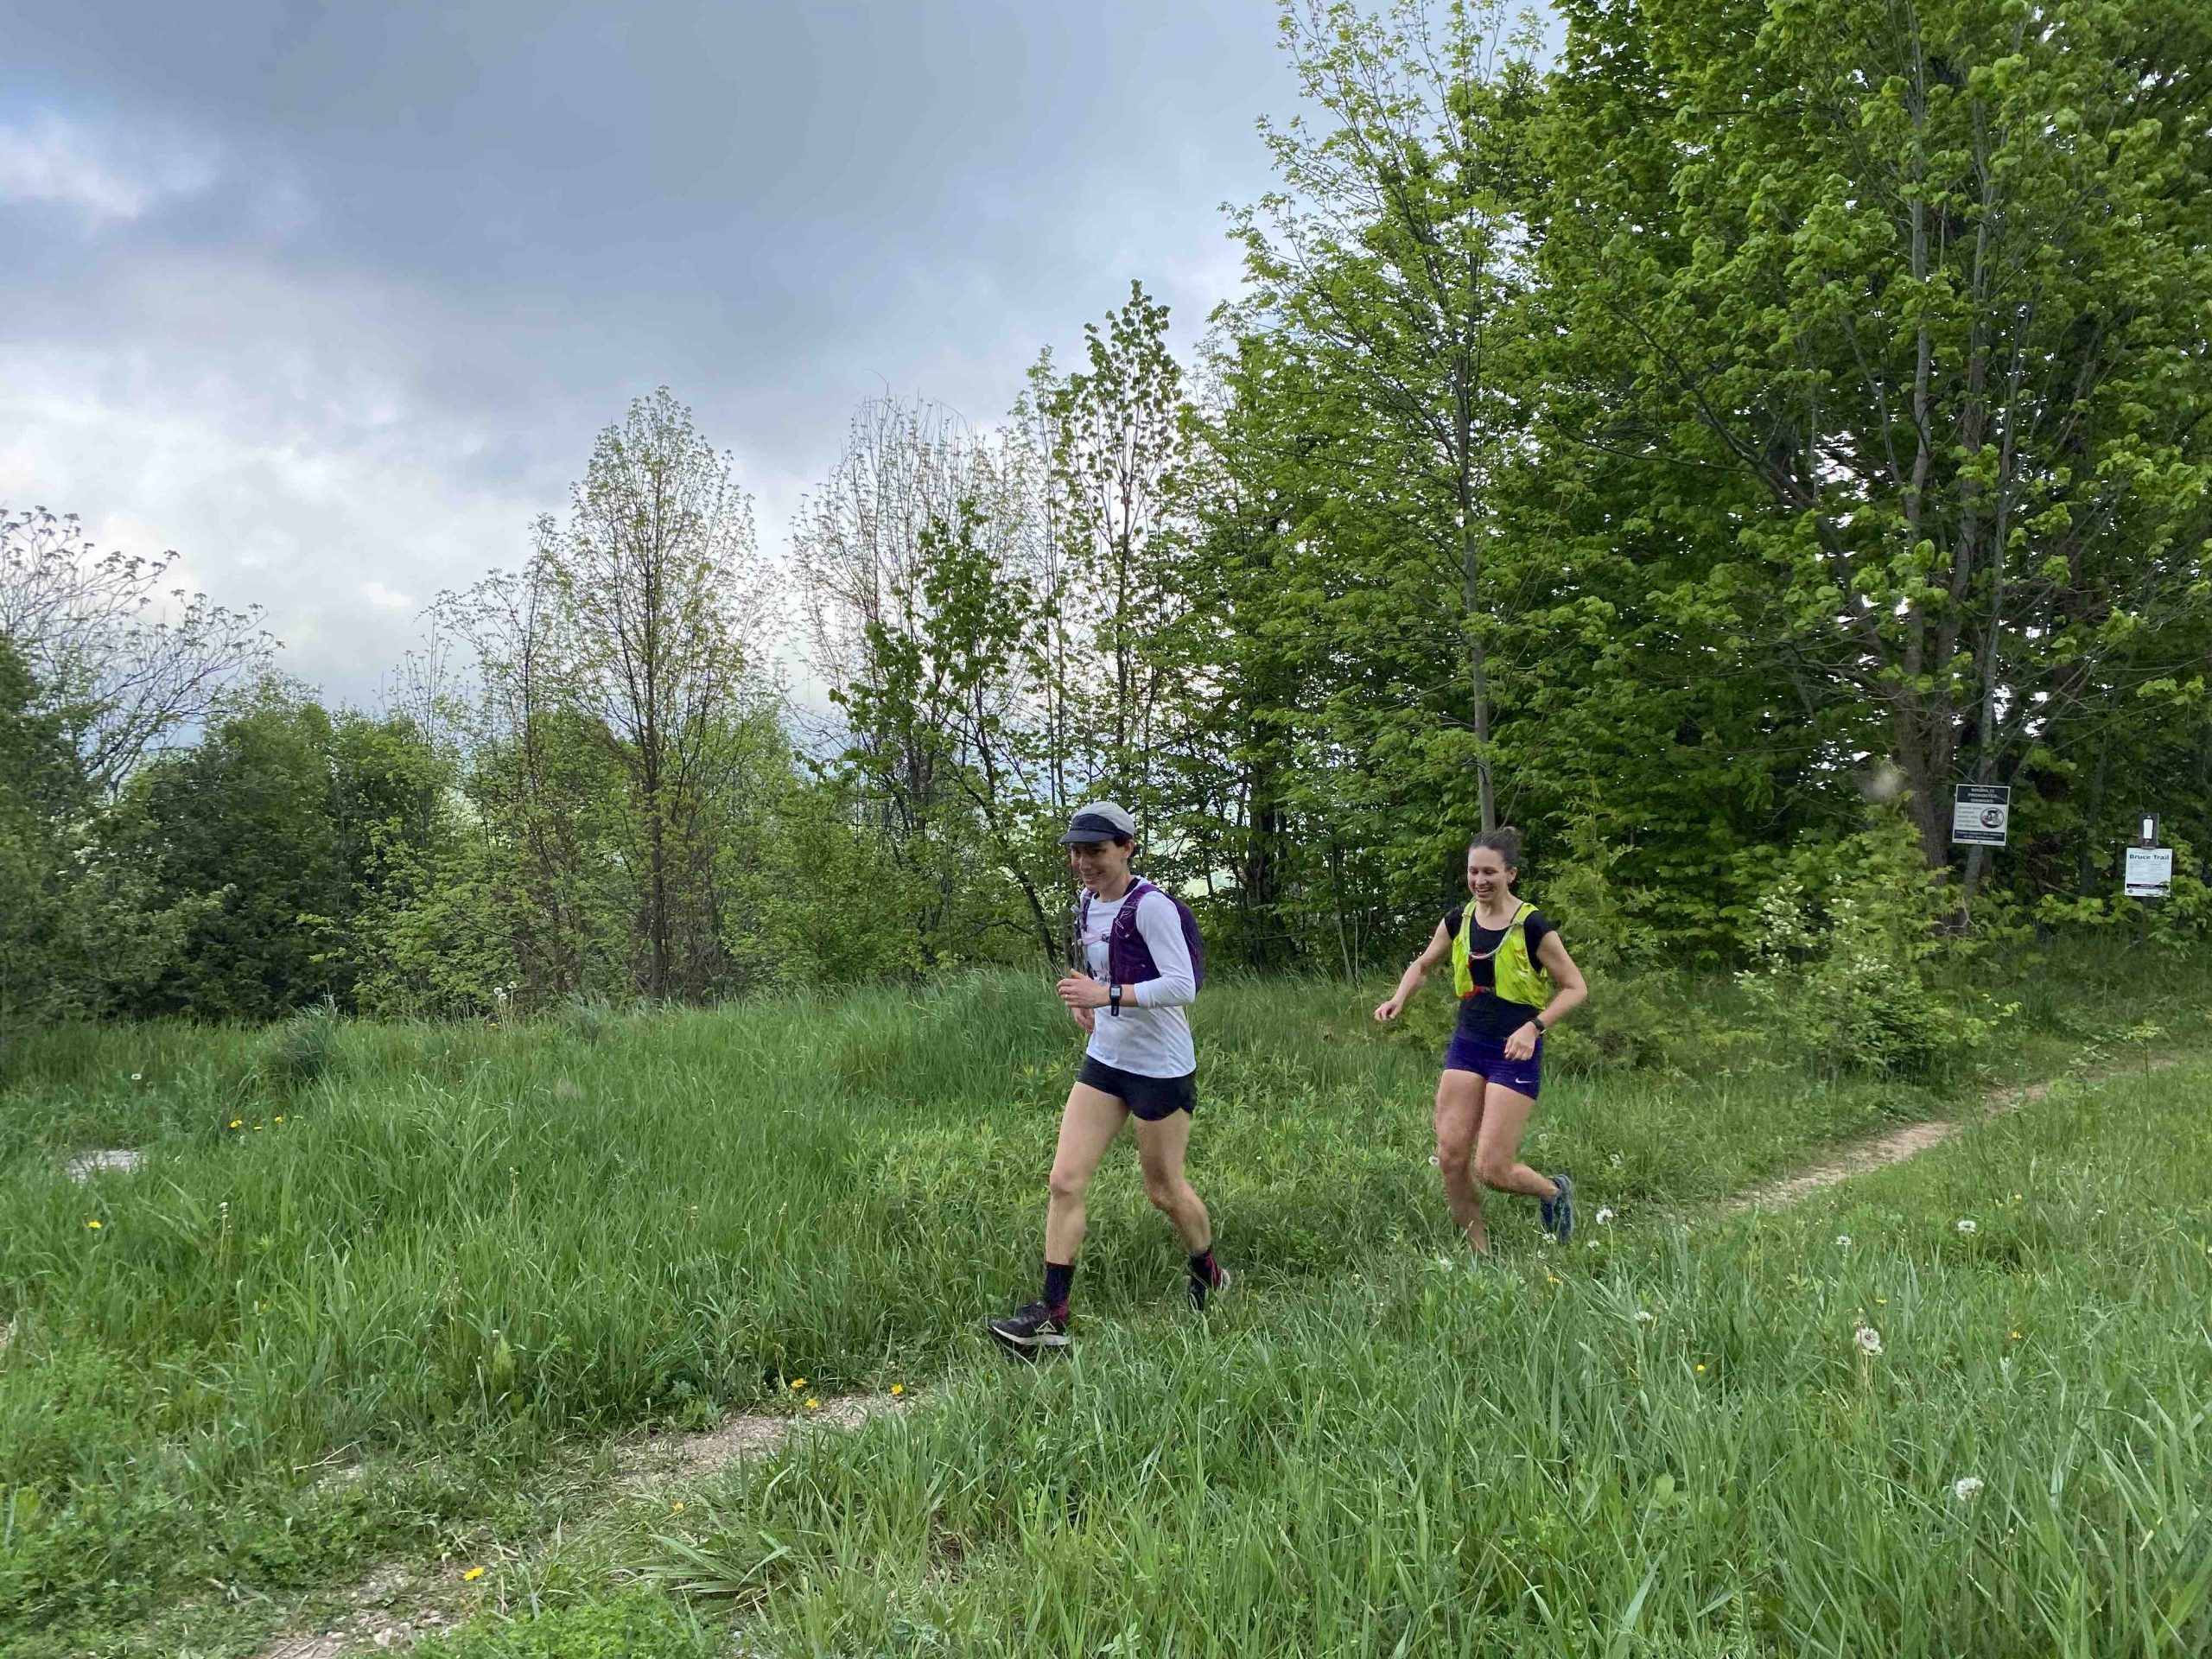 Two people are running on a grassy trail through a forested area. The runner on the left wears a white shirt, black shorts, and a hat. The runner on the right wears a yellow tank top and blue shorts. Trees and a cloudy sky are in the background.